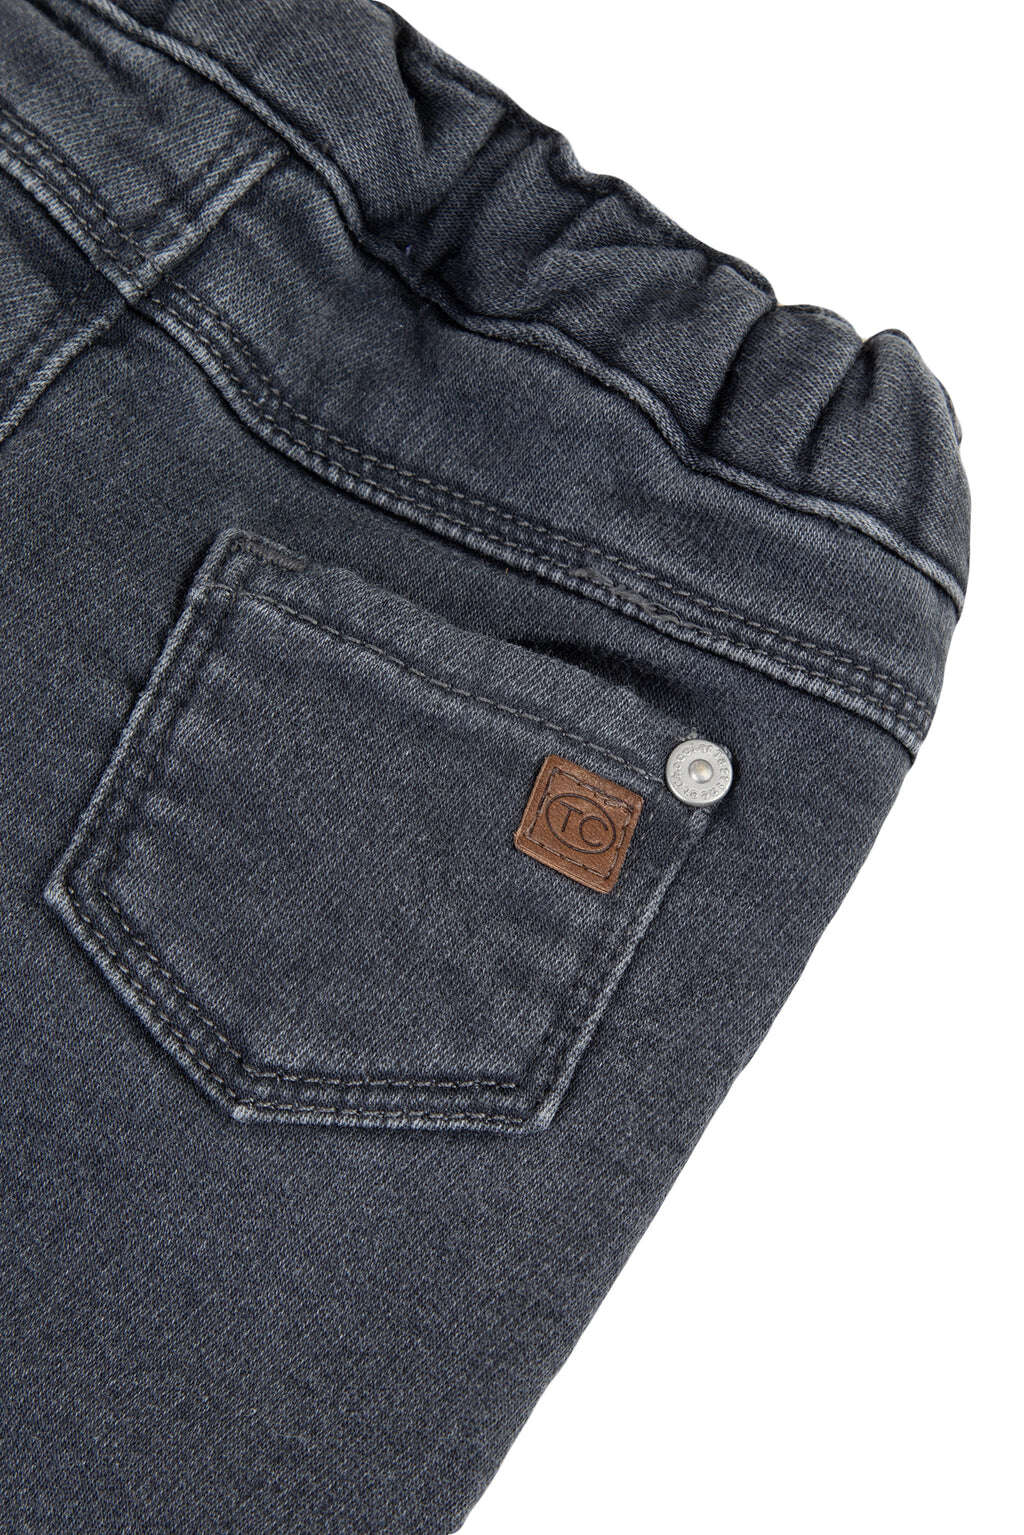 Trousers - Jeans Light grey